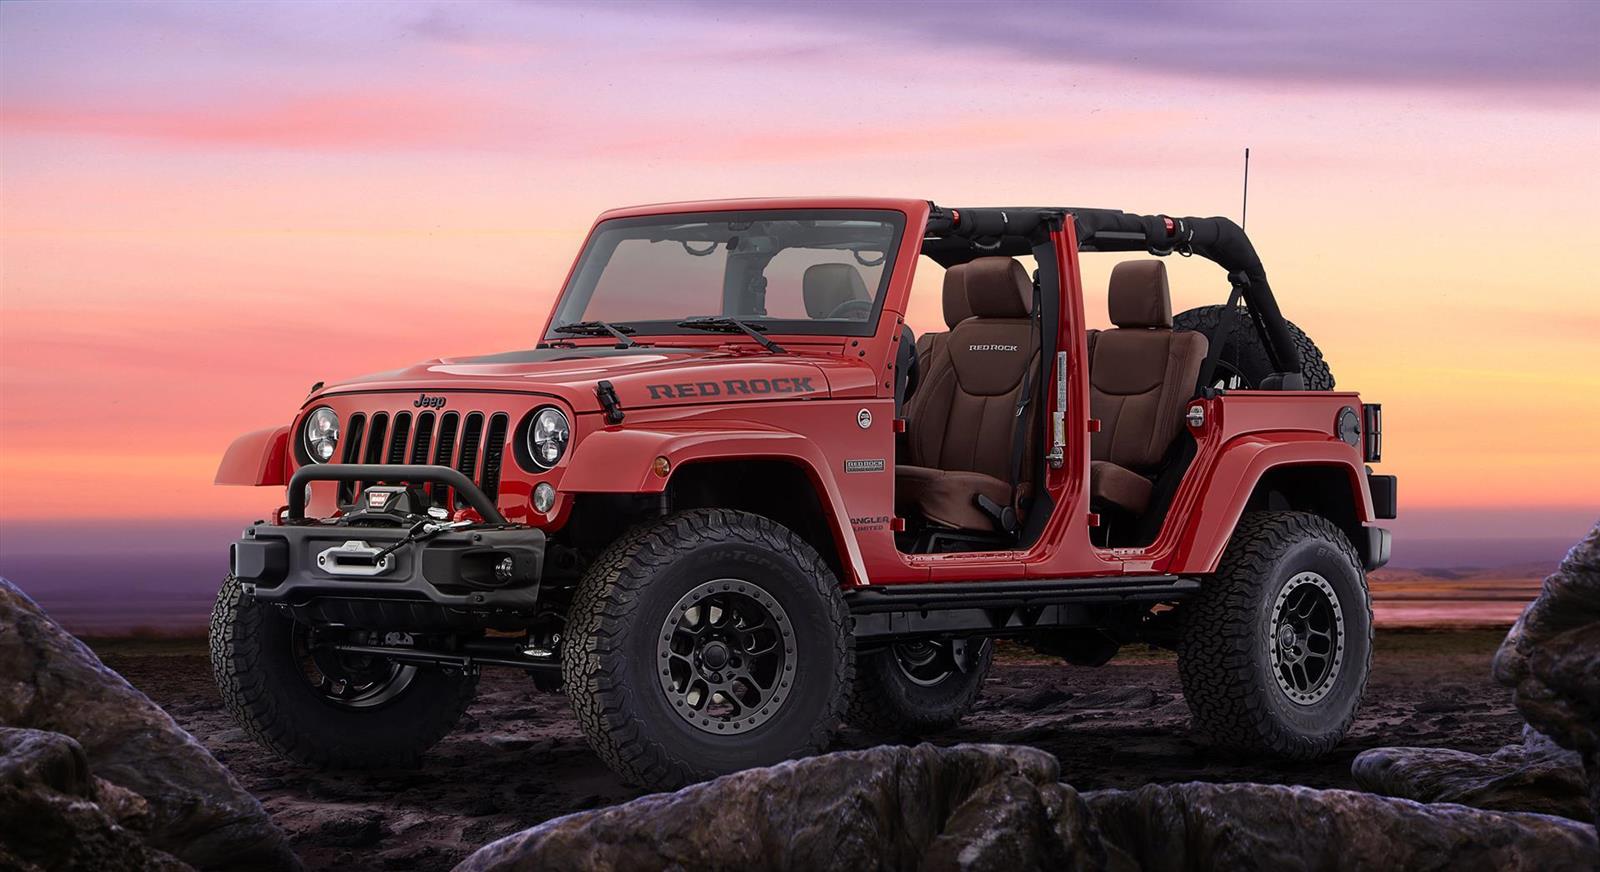 2015 Jeep Wrangler Red Rock Concept